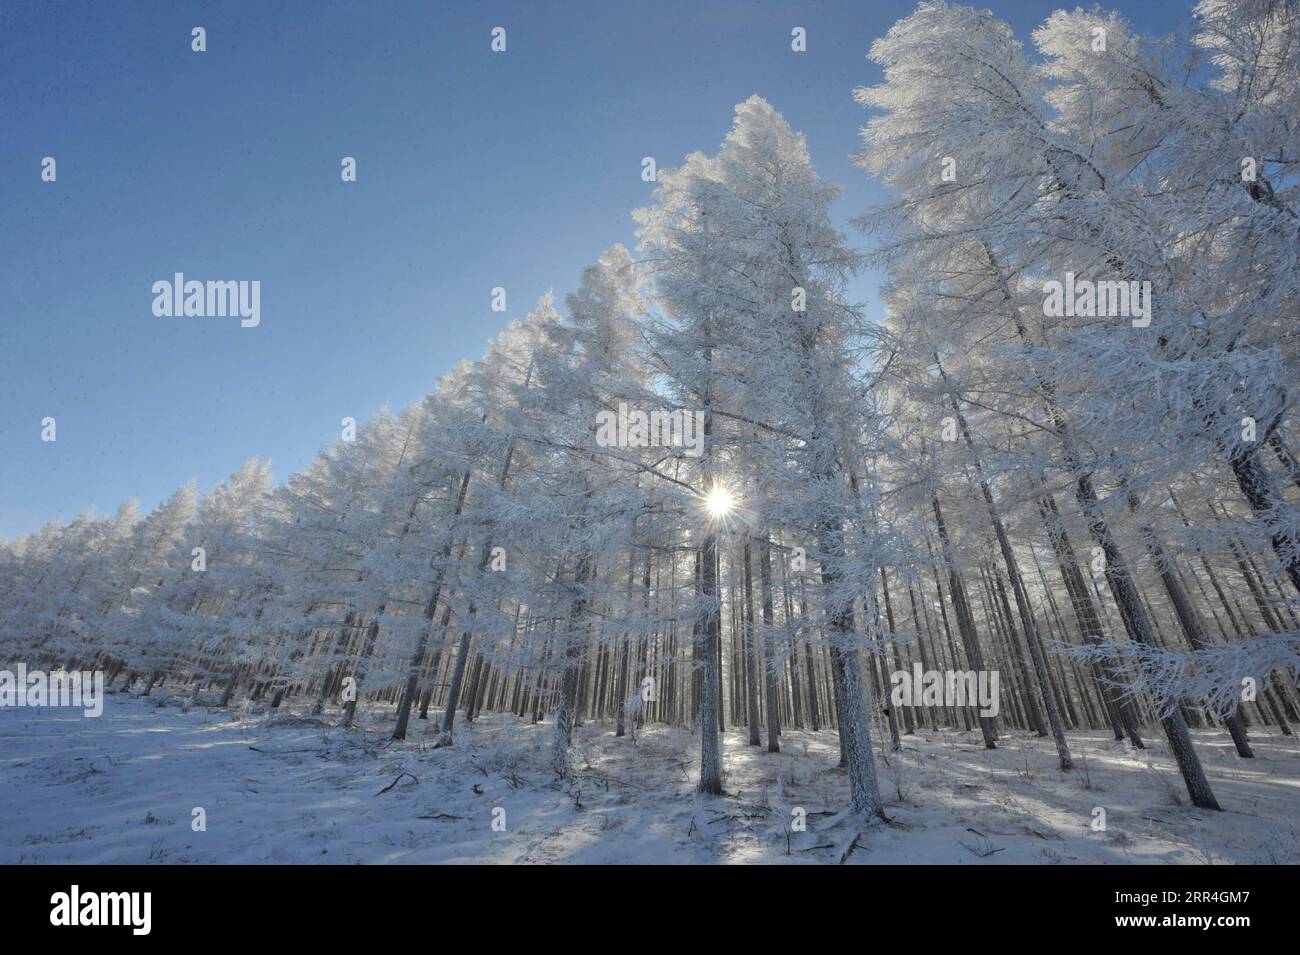 201204 -- CHENGDE, Dec. 4, 2020 -- Photo taken on Dec. 4, 2020 shows the winter scenery of Yudaokou pasture in Chengde City, north China s Hebei Province. Photo by /Xinhua CHINA-HEBEI-CHENGDE-WINTER SCENERYCN WangxLiqun PUBLICATIONxNOTxINxCHN Stock Photo